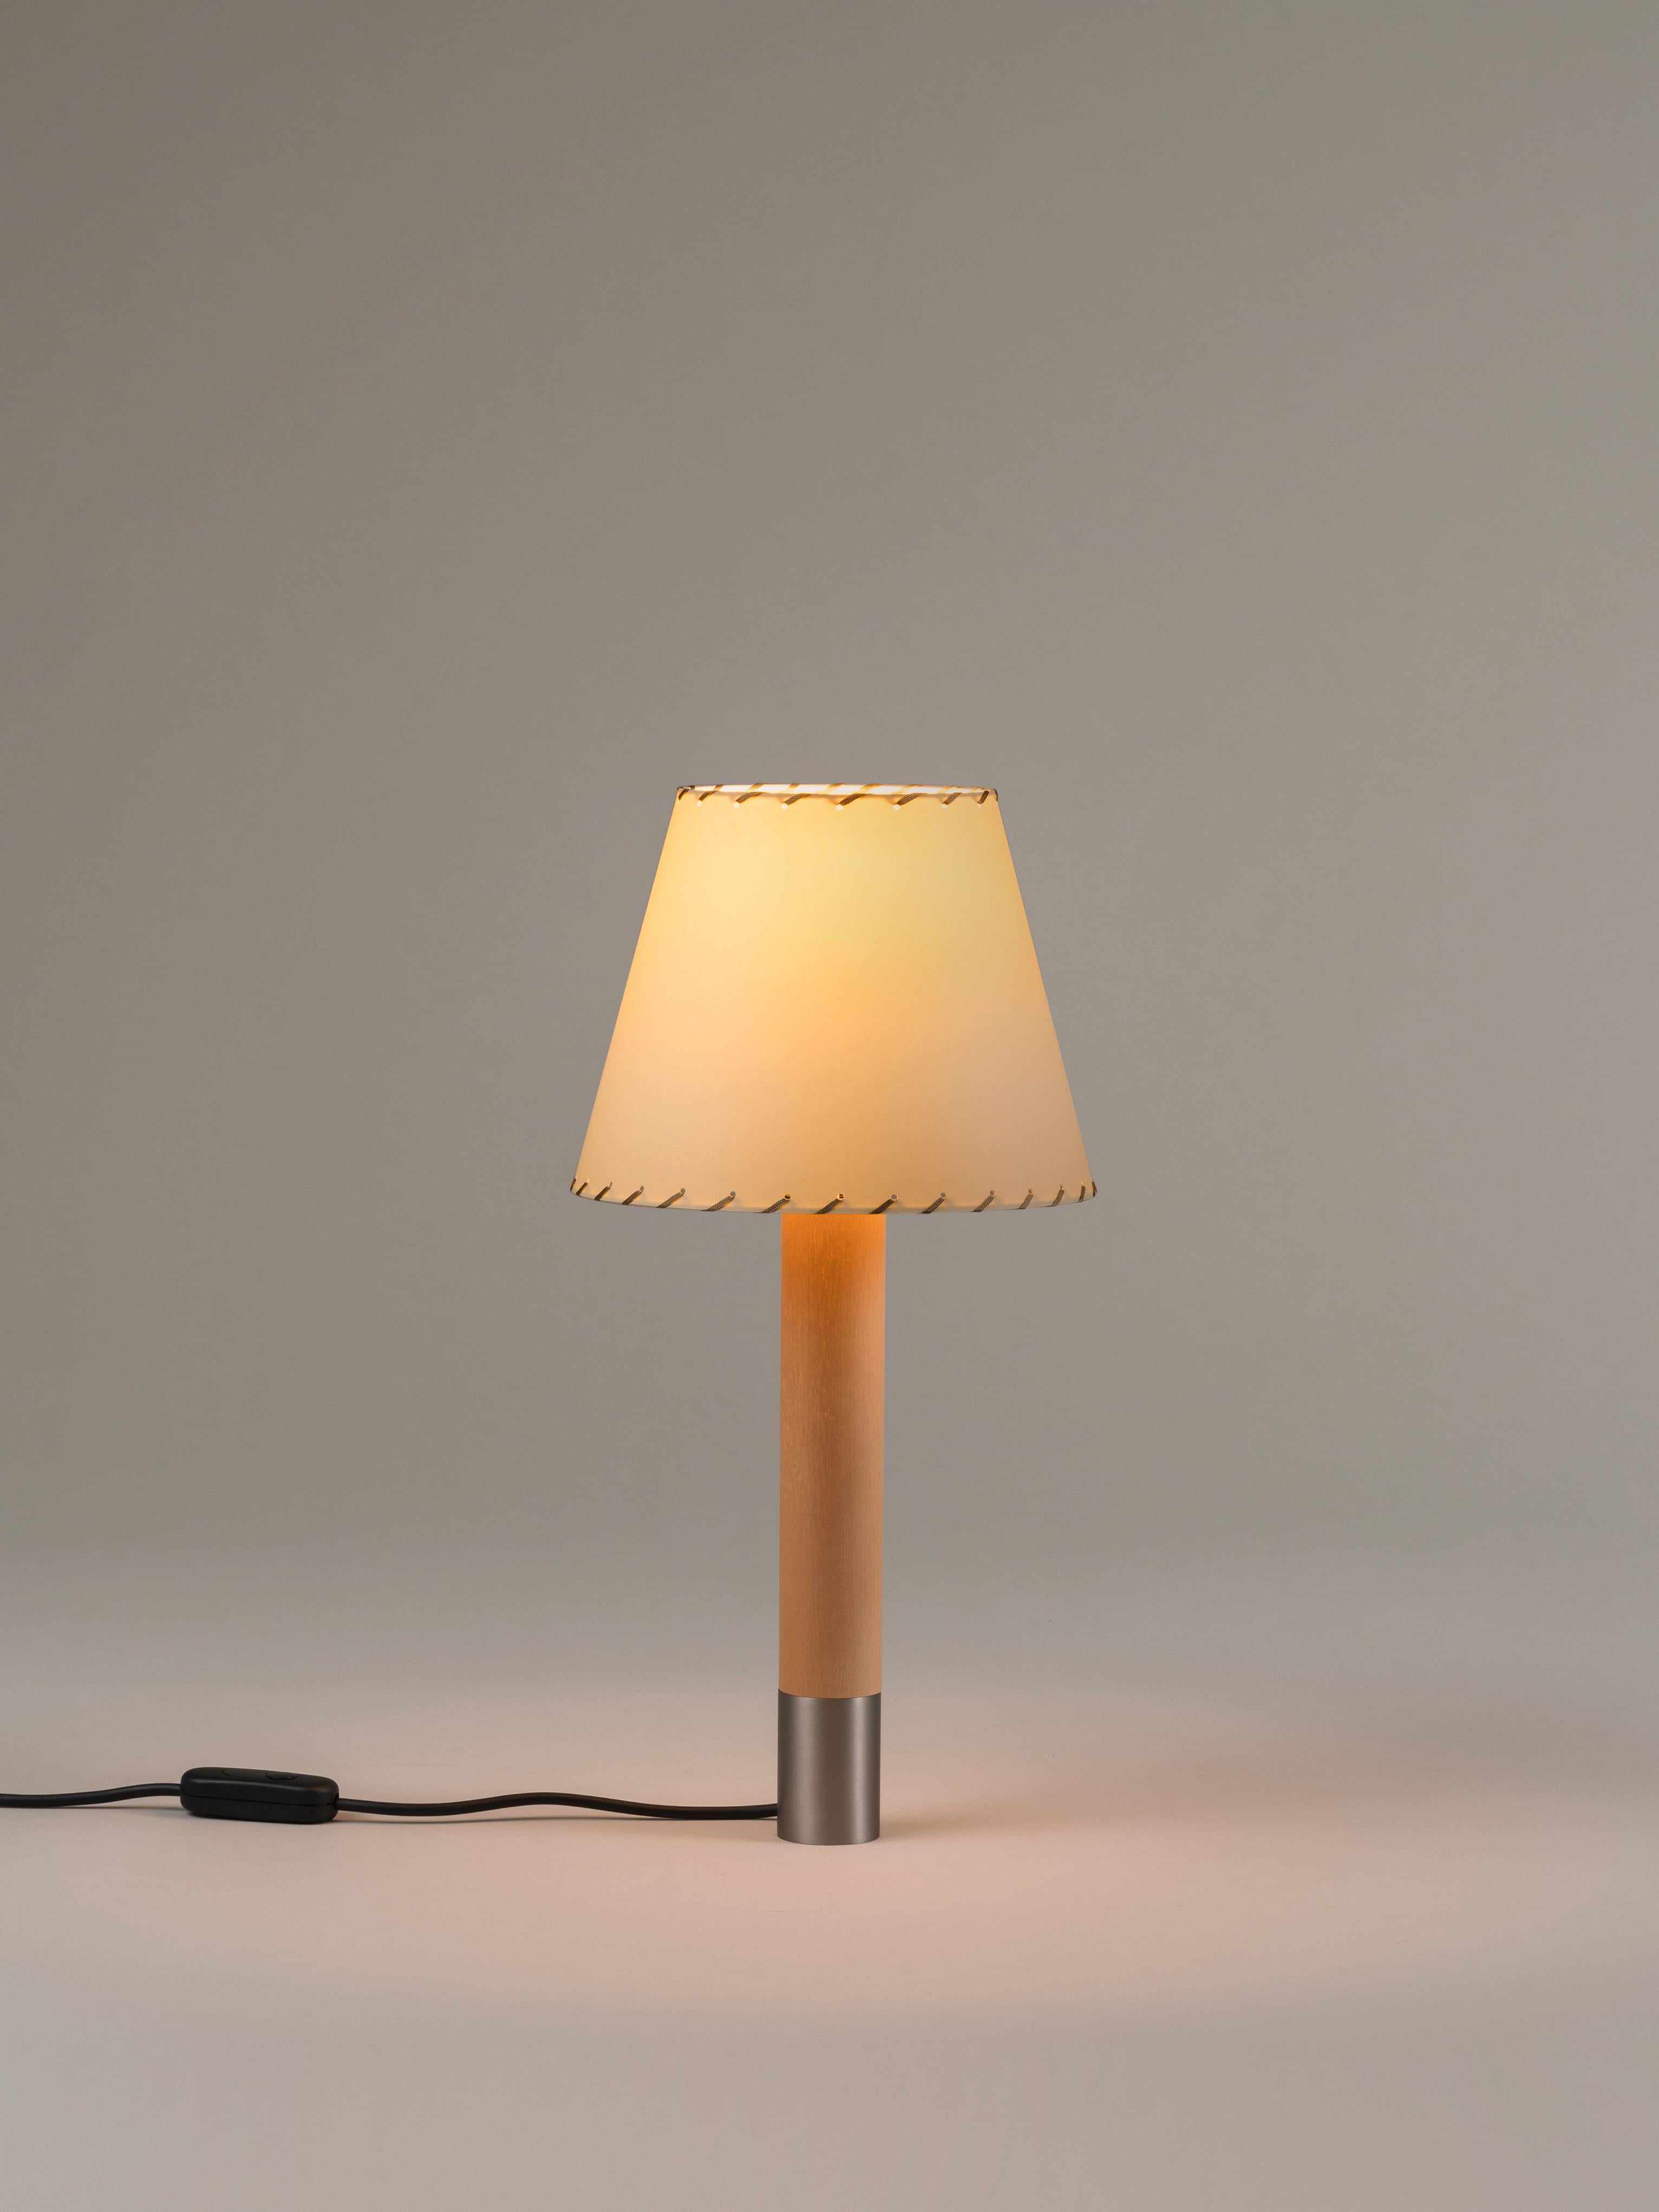 Nickel and Beige Básica M1 table lamp by Santiago Roqueta, Santa & Cole.
Dimensions: D 25 x H 52 cm.
Materials: Nickel, birch wood, paperboard.
Available in other shade colors and with or without the stabilizing disc.
Available in nickel or